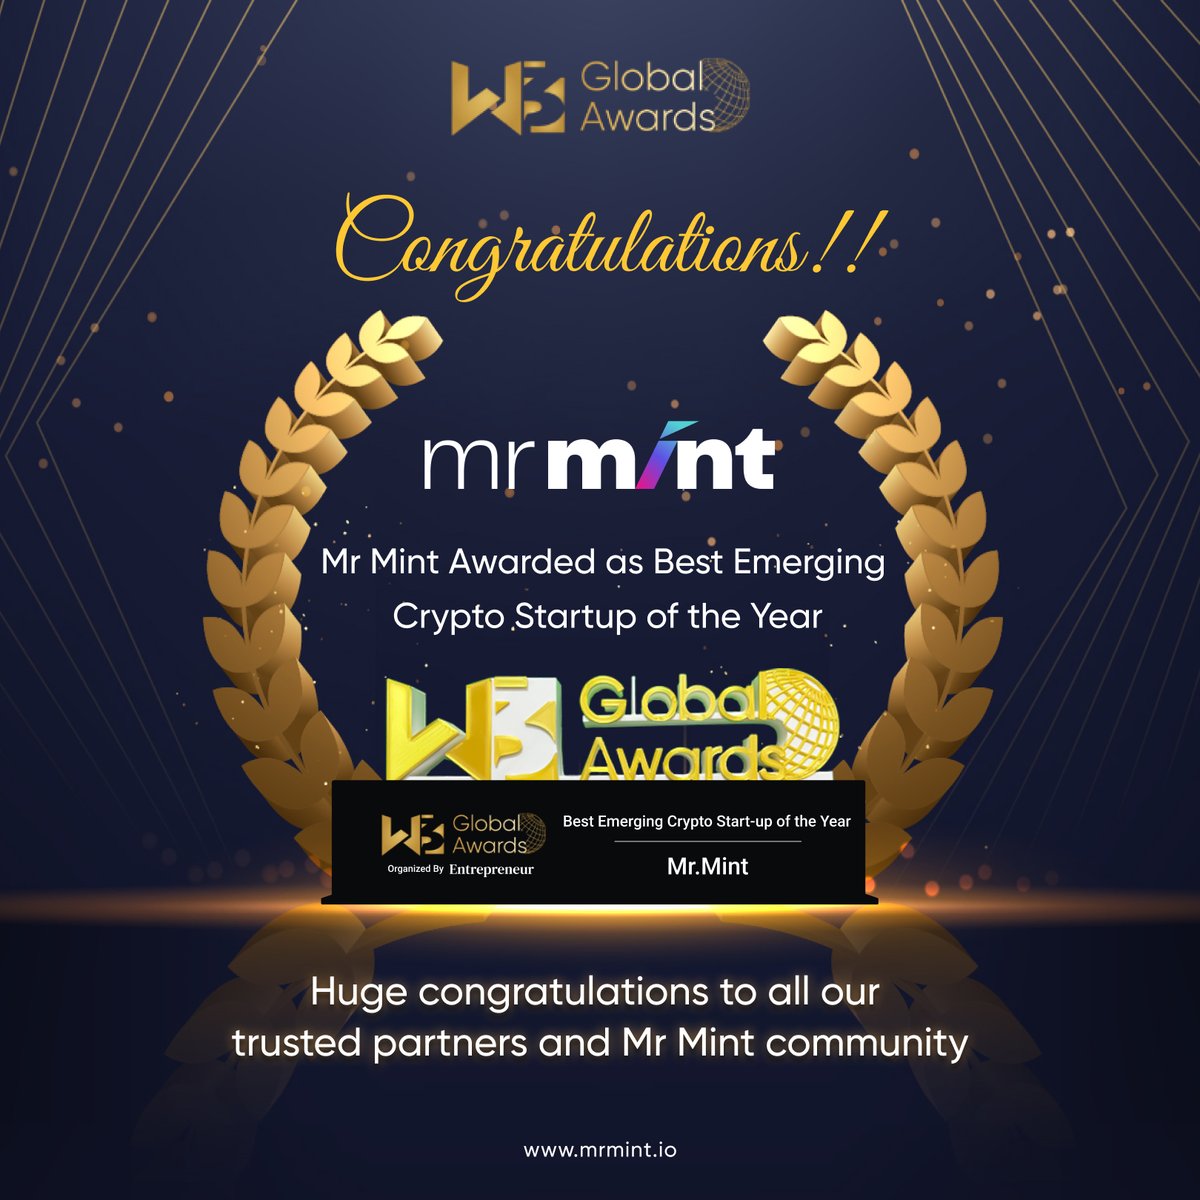 Thrilled and honored to be crowned the Emerging Crypto Startup of the Year at W3 Summit! 

This award fuels our passion to redefine the crypto landscape.

Thank you for believing in Mr Mint!

#mrmint #cryptostartup #W3summit #W3GlobalAwards #globalawards #emergingcrypto #Asia